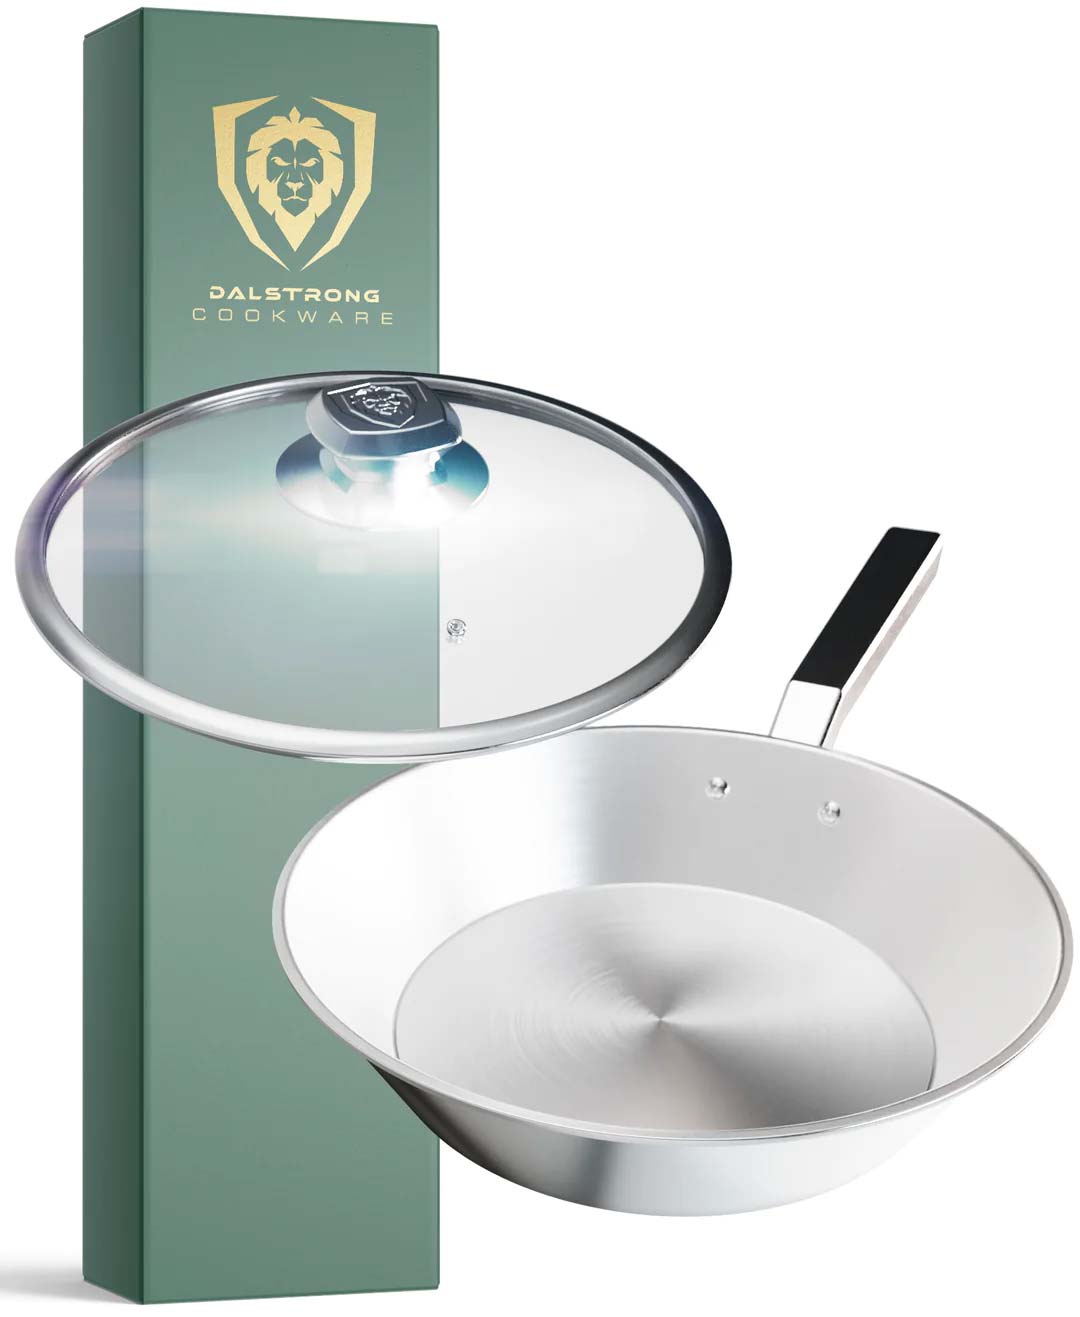 Dalstrong oberon series 10 inch frying pan skillet silver in front of it's premium packaging.